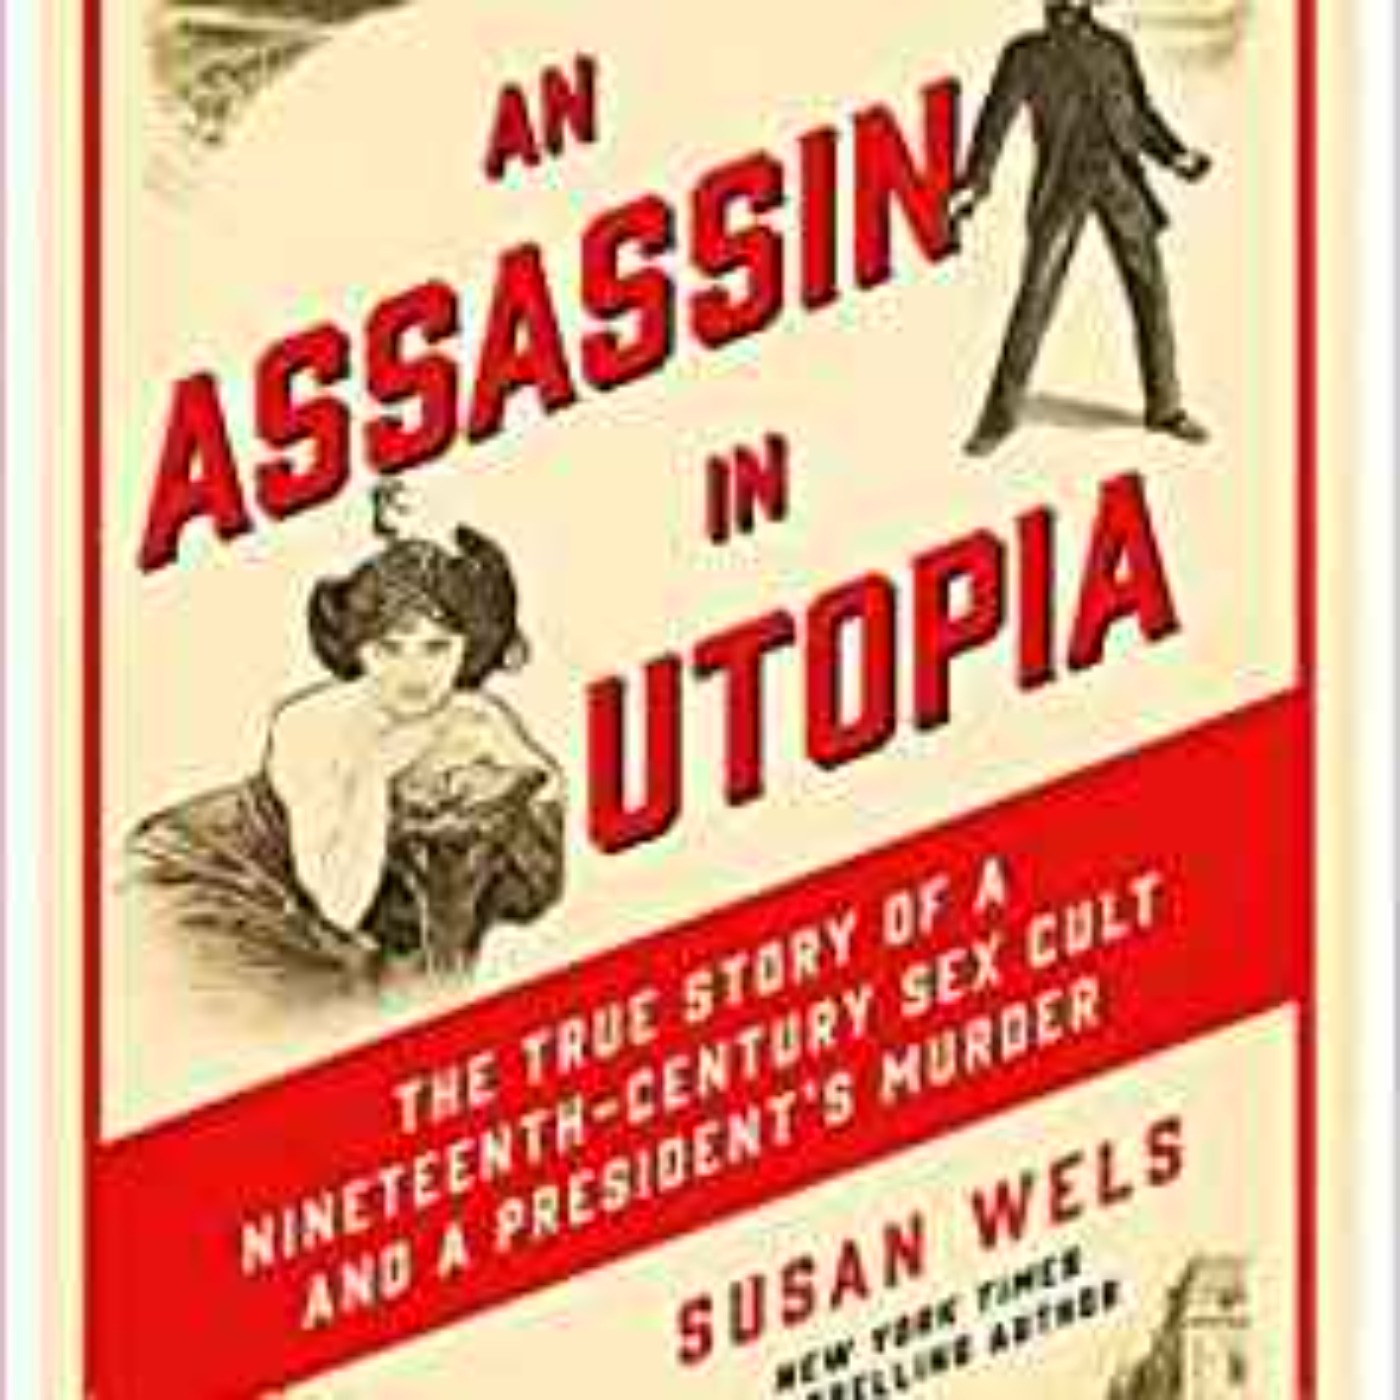 Susan Wels - An Assassin in Utopia: The True Story of a Nineteenth-Century Sex Cult and a President's Murder